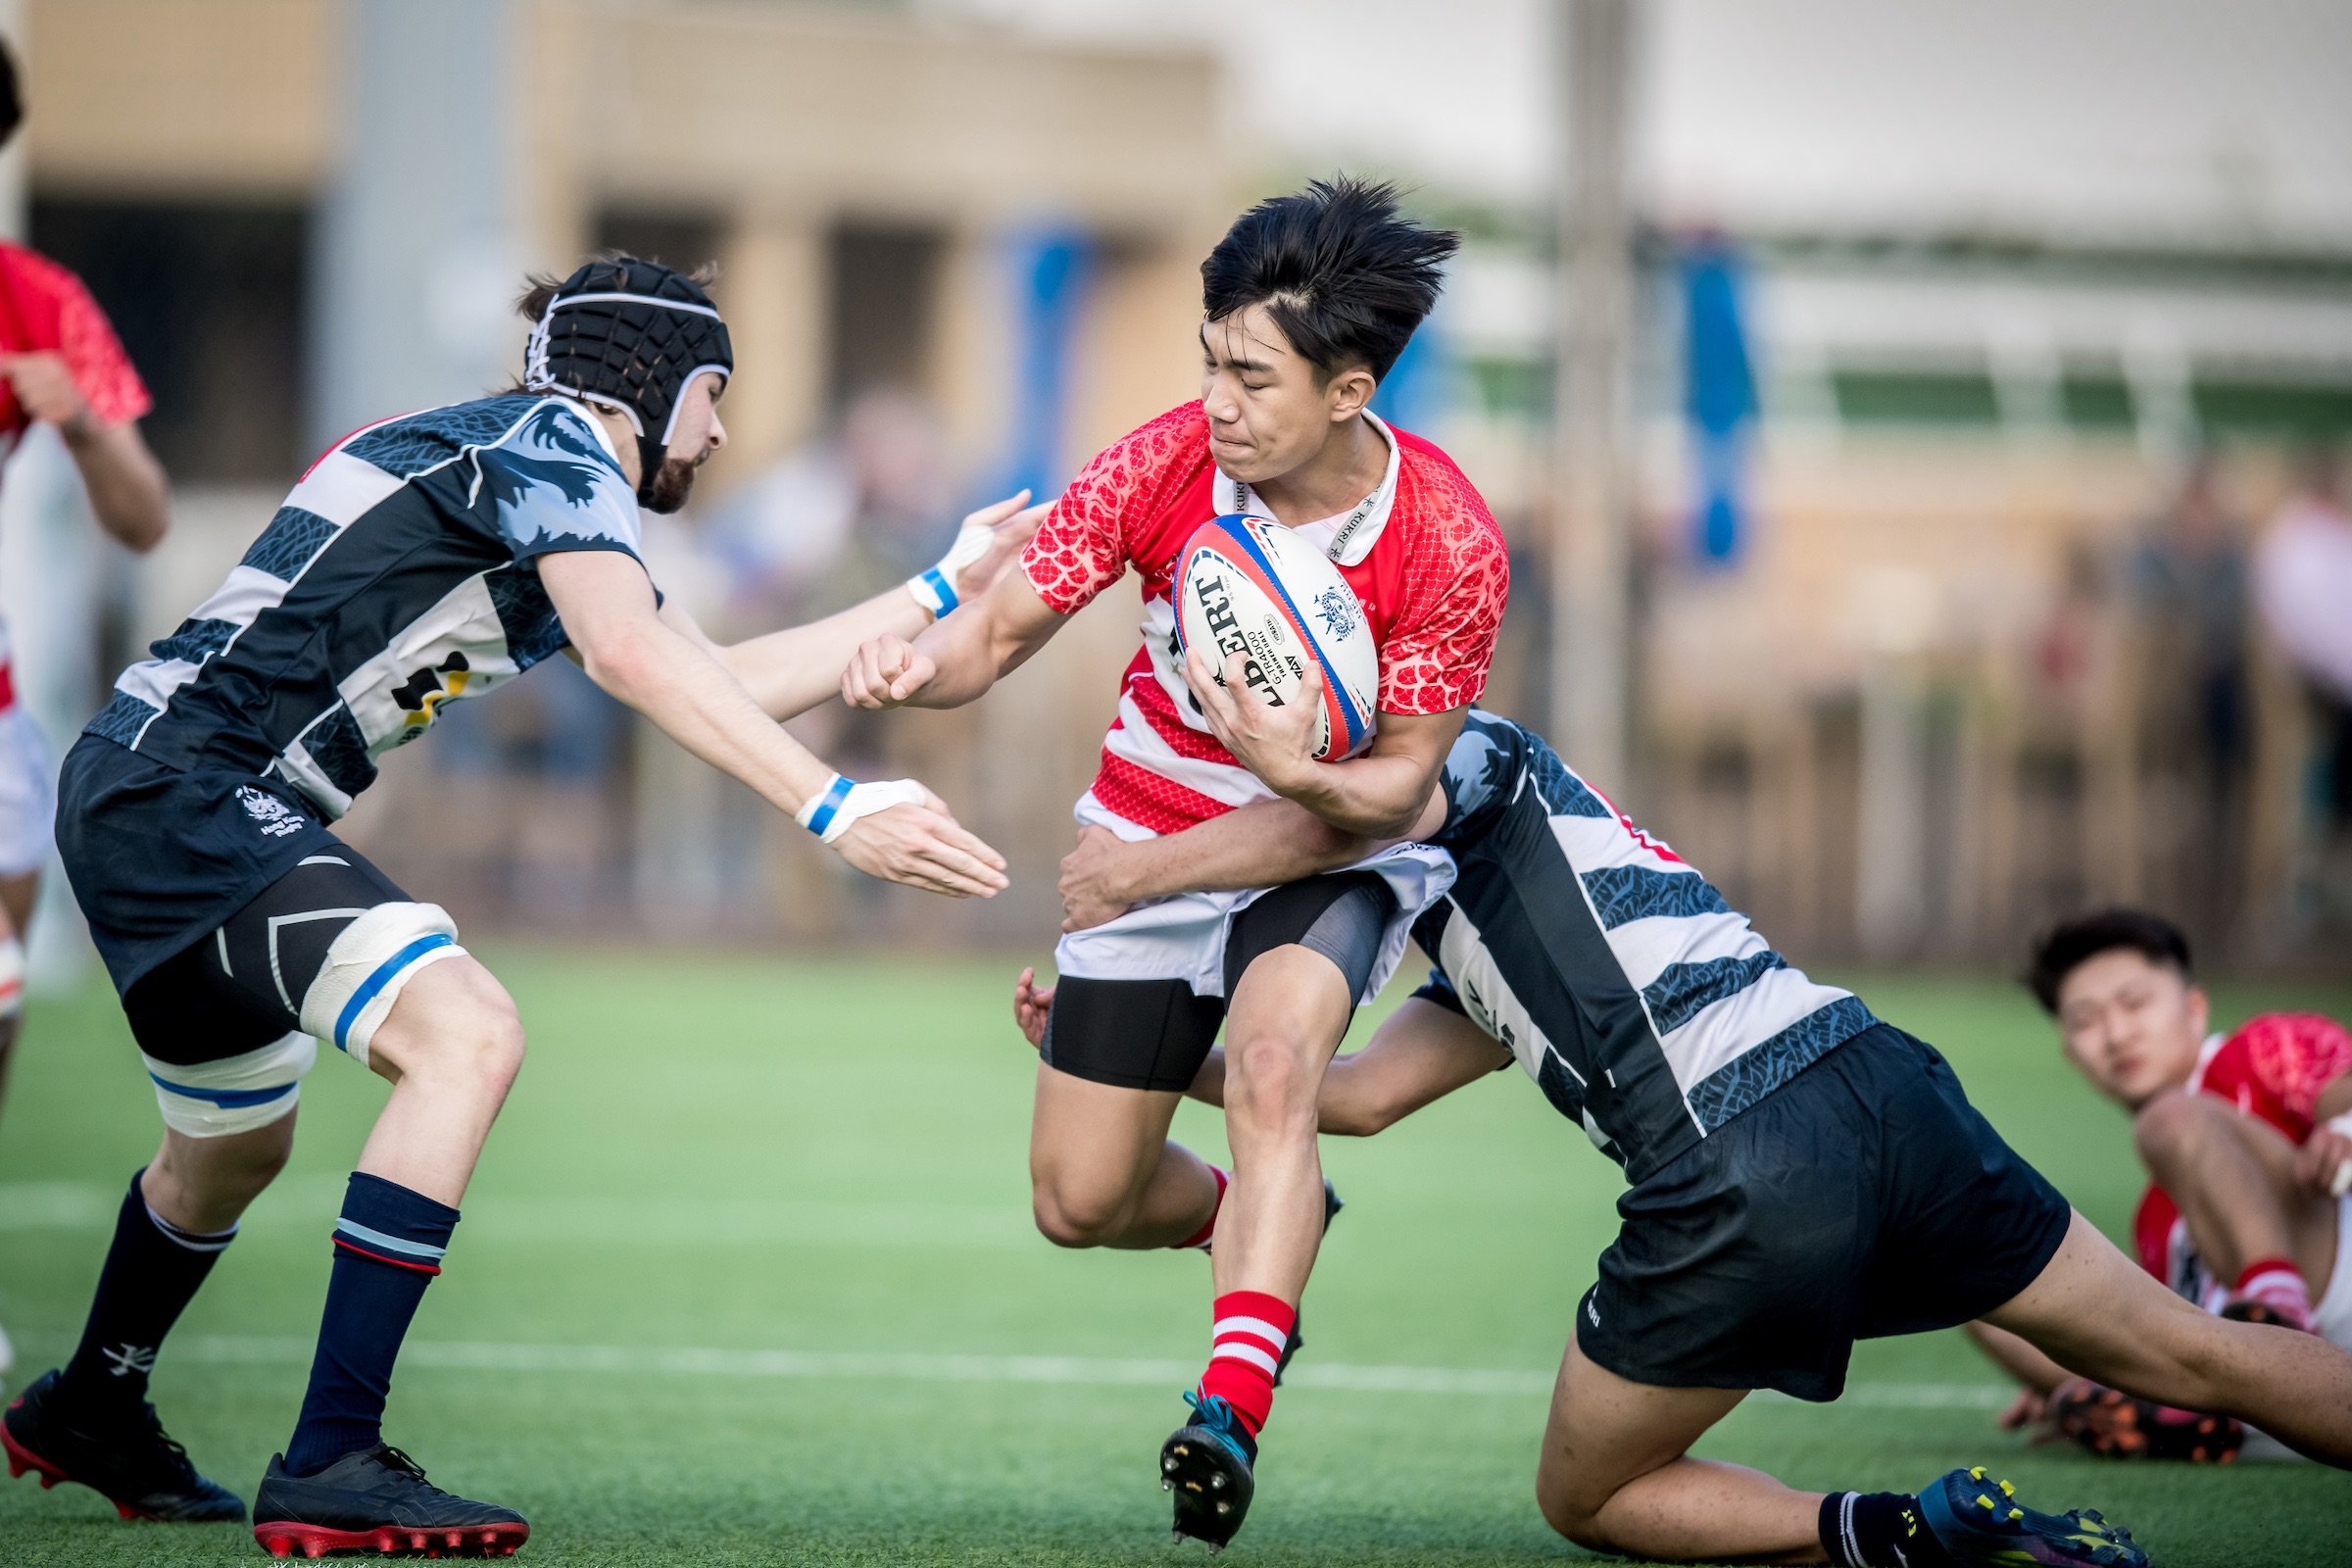 Under-19 boys in action during the 2022 New Year’s Day Youth Rugby Tournament at Hong Kong Football Club. Photo: Ike Images